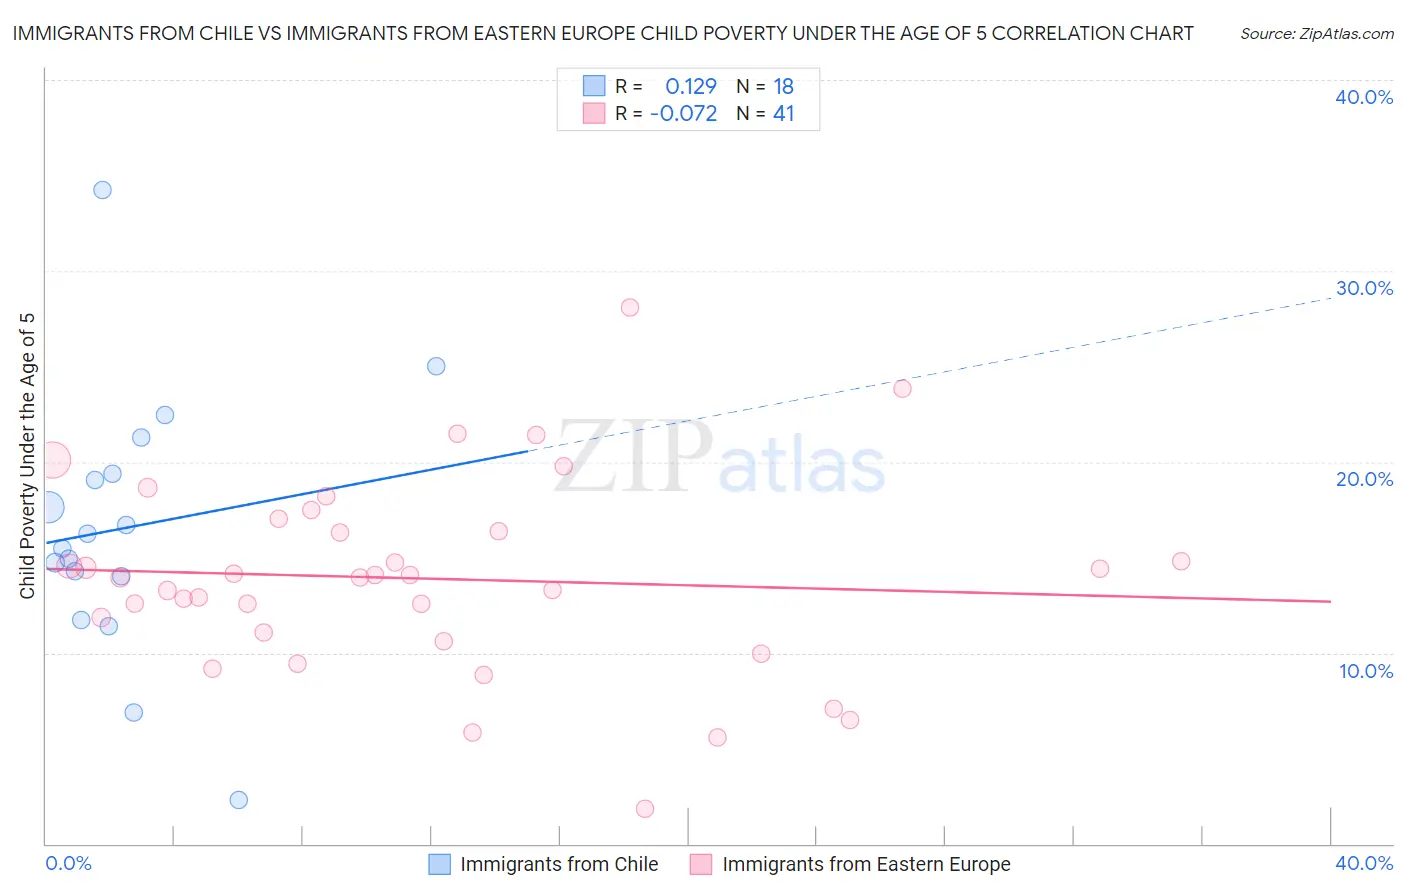 Immigrants from Chile vs Immigrants from Eastern Europe Child Poverty Under the Age of 5